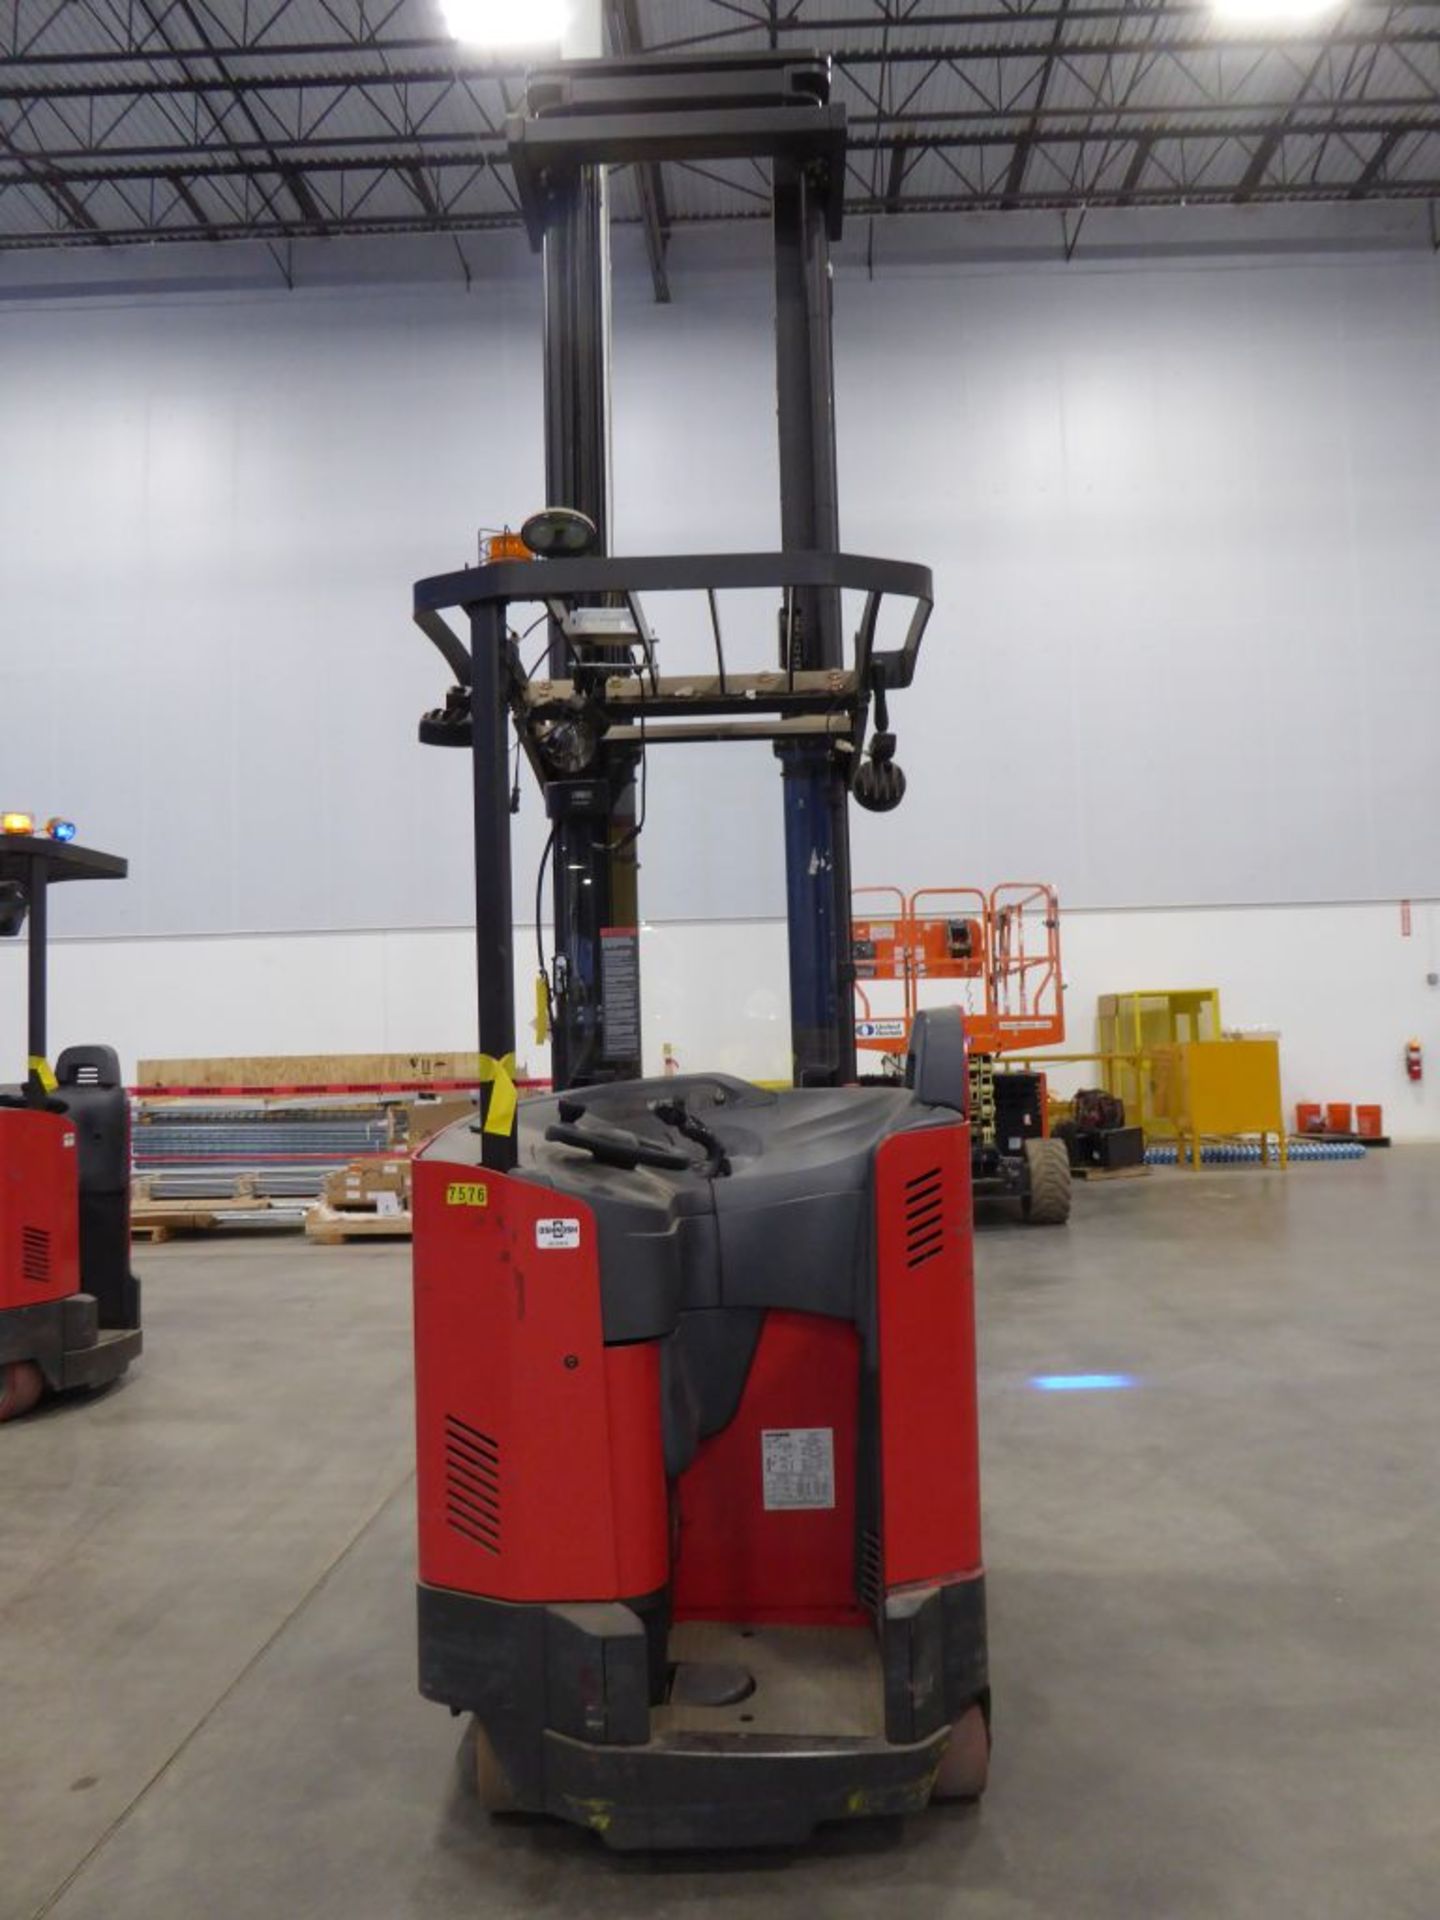 Raymond 7500 Universal Stance Reach Forklift - Image 5 of 10